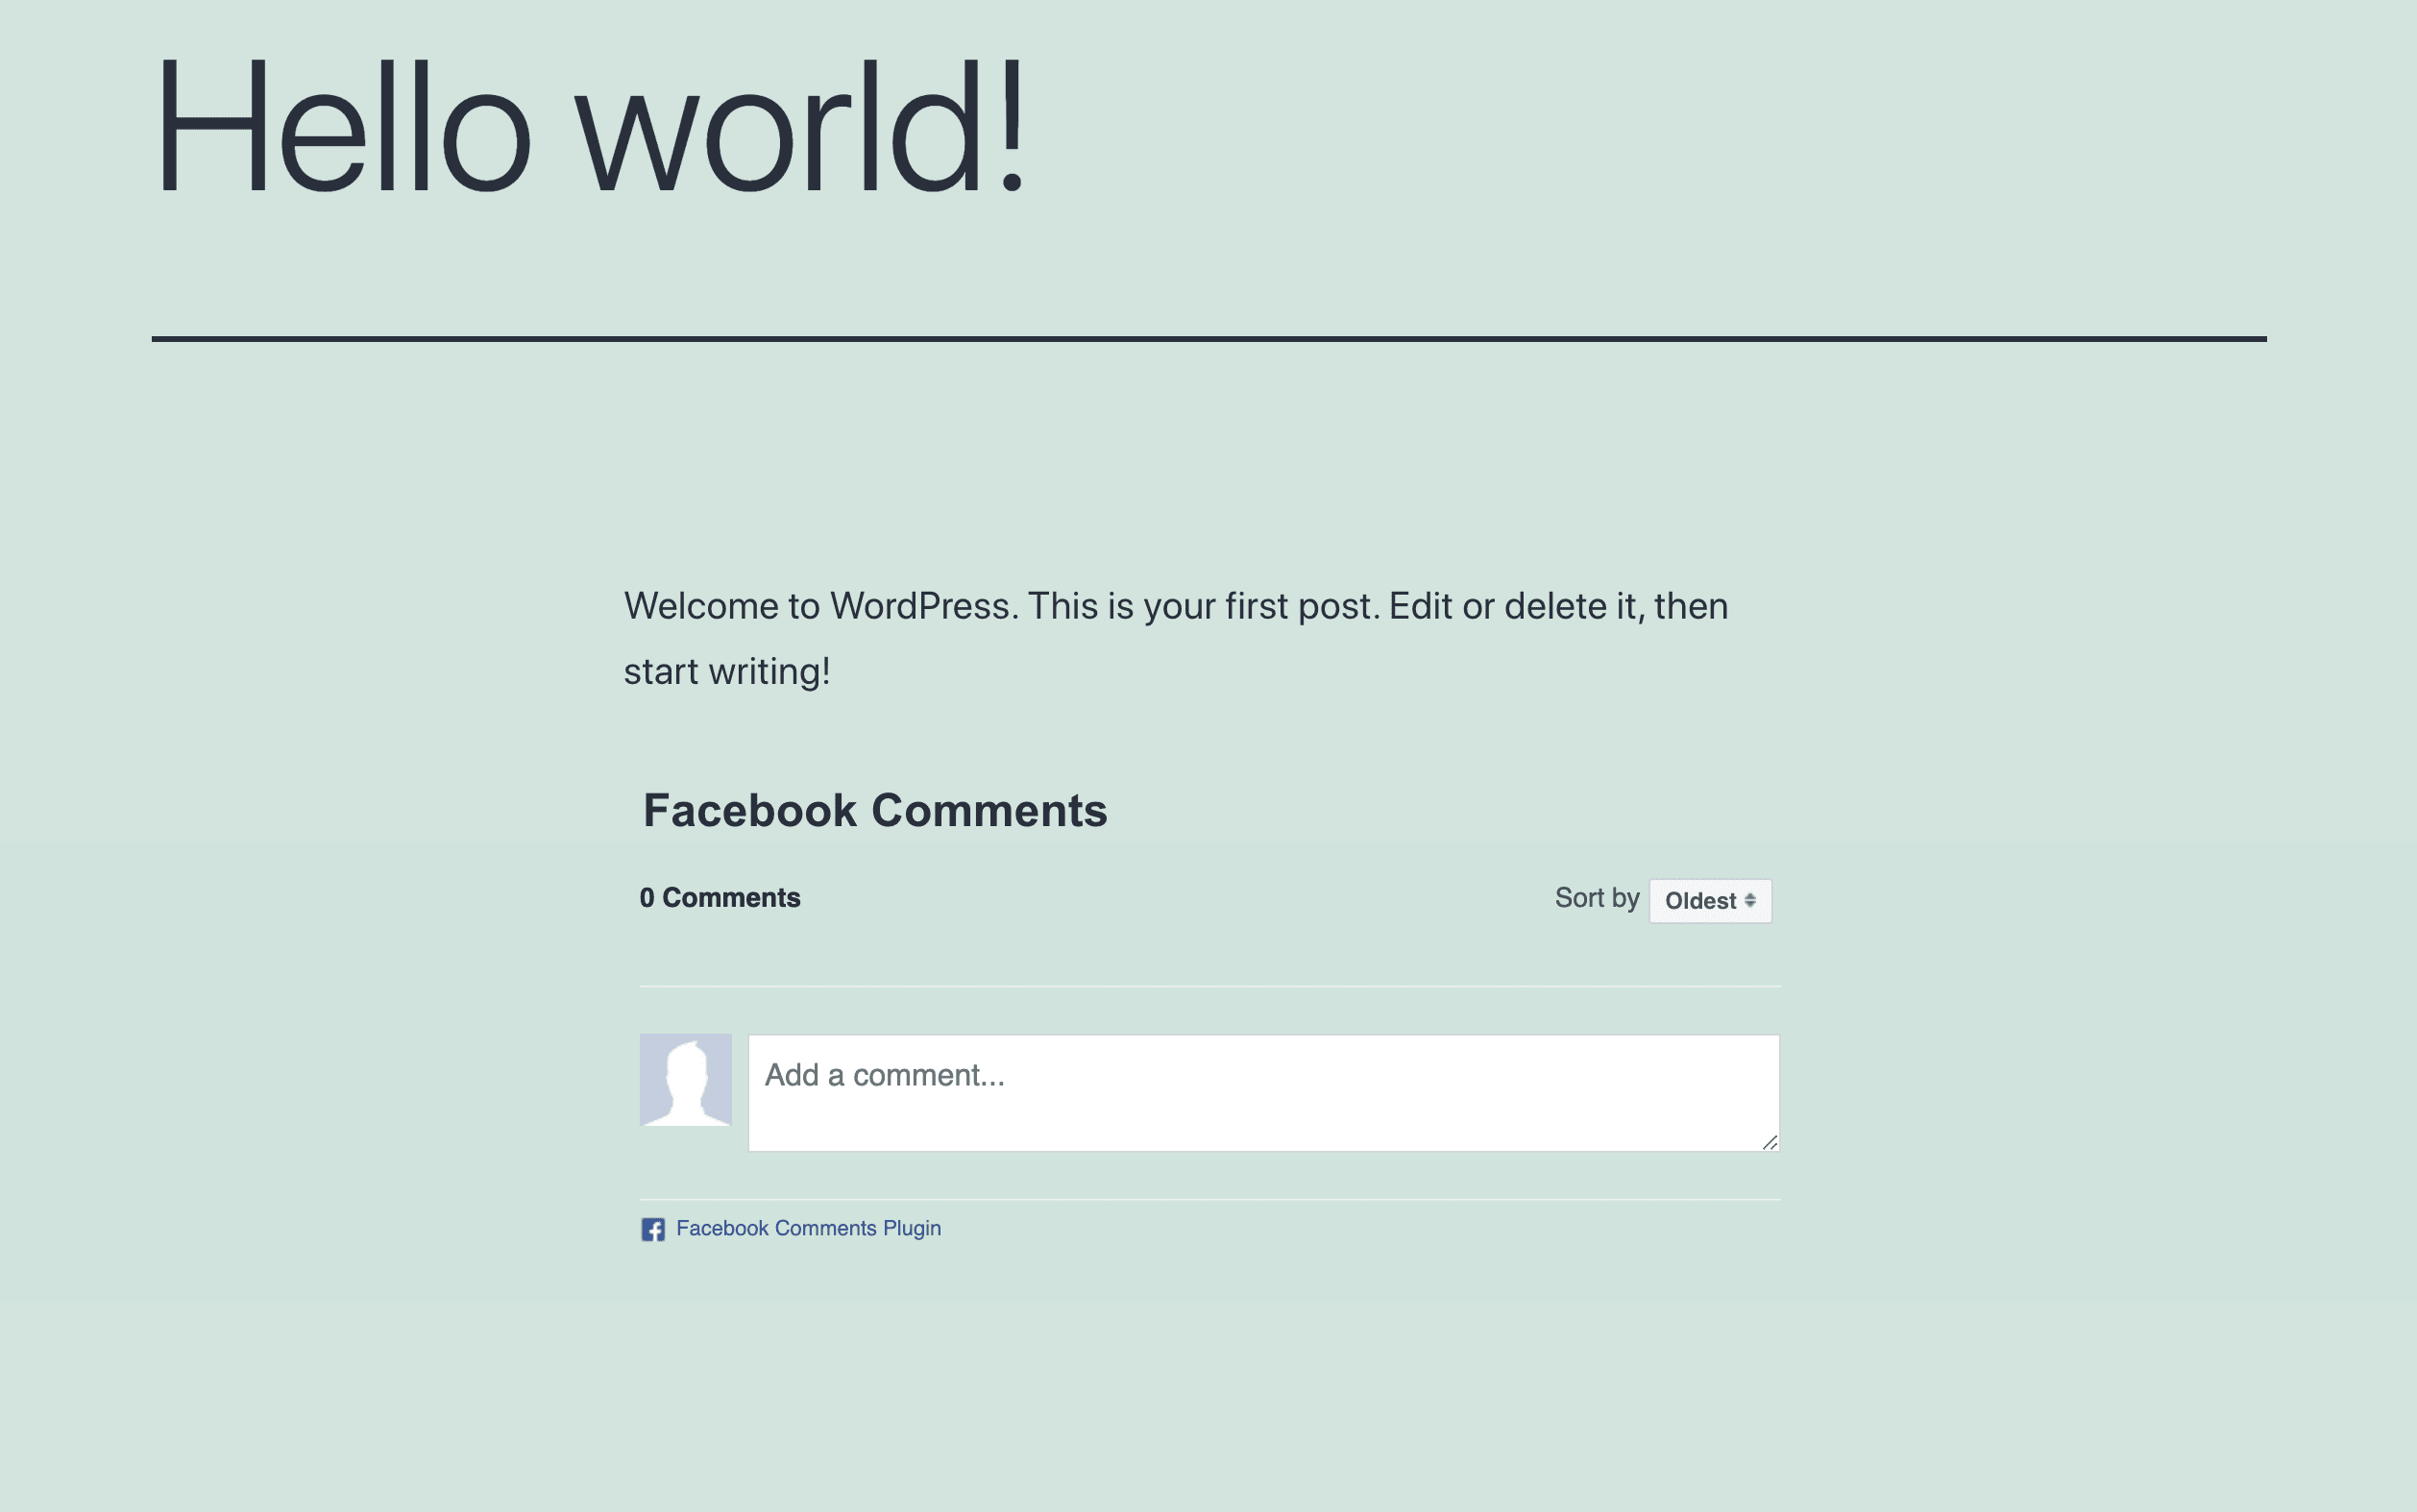 A Facebook comment box on a WordPress blog post.